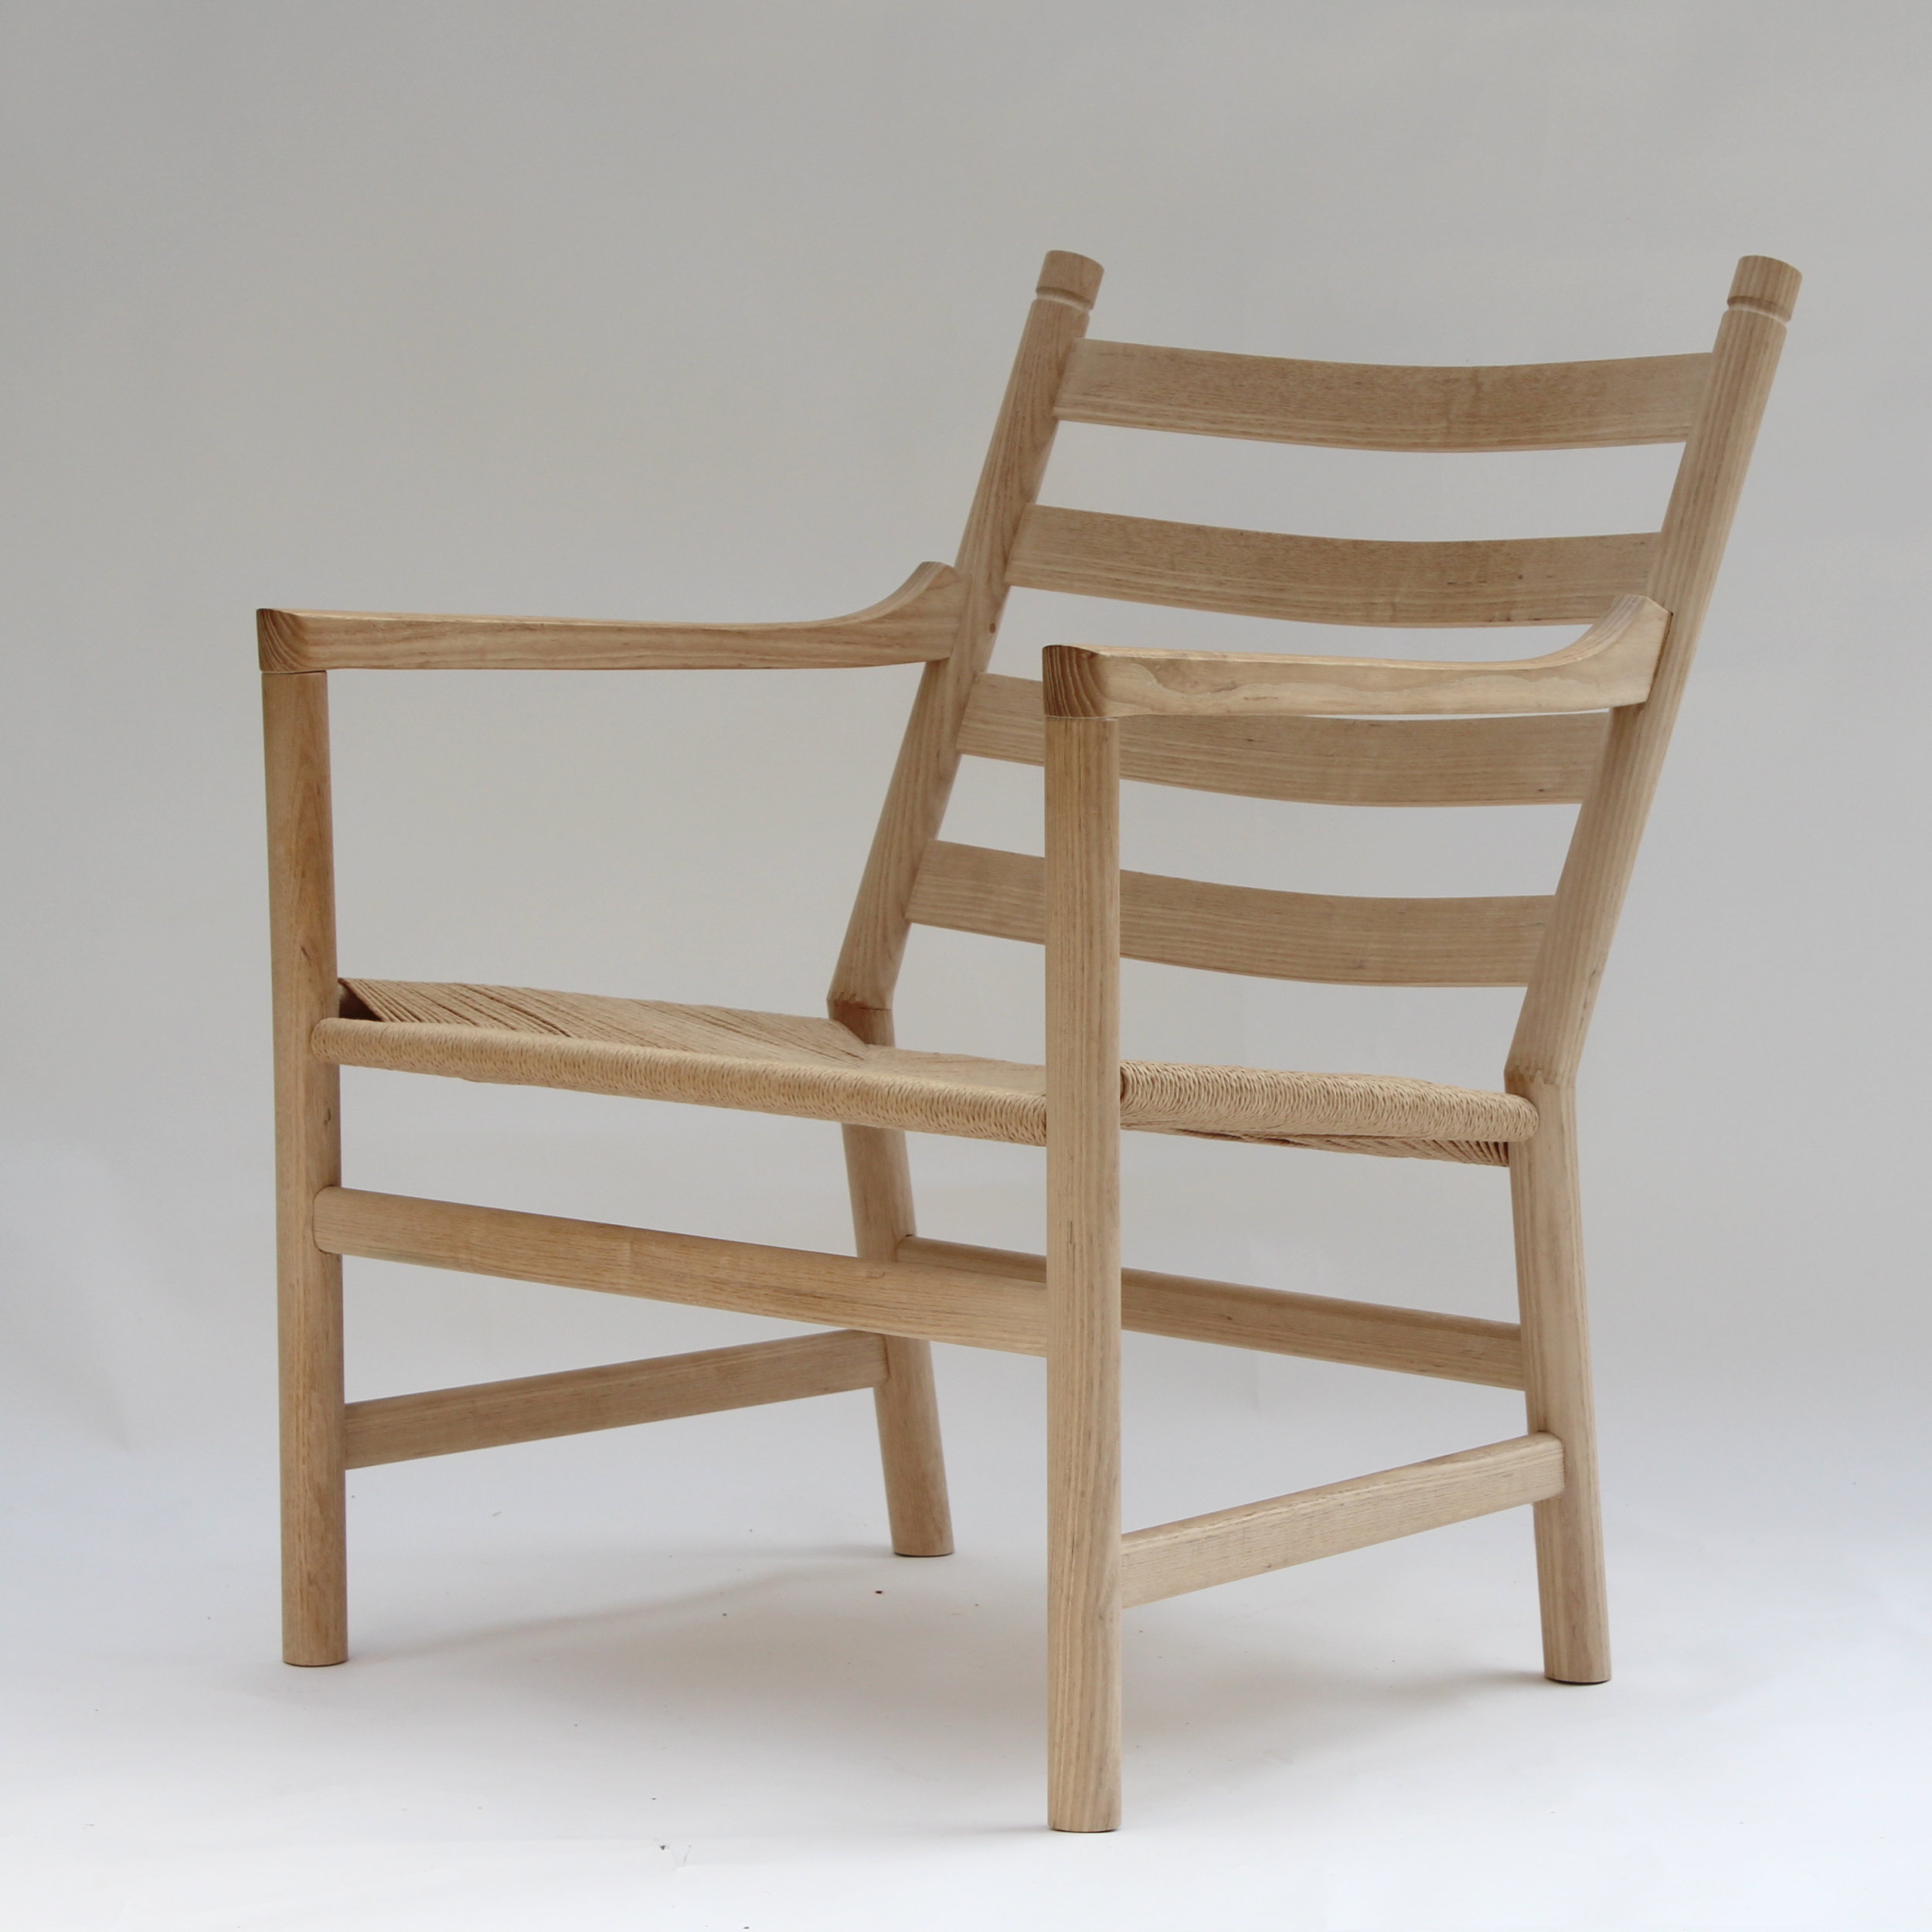 Wegner ch44 chair right front angle.JPG